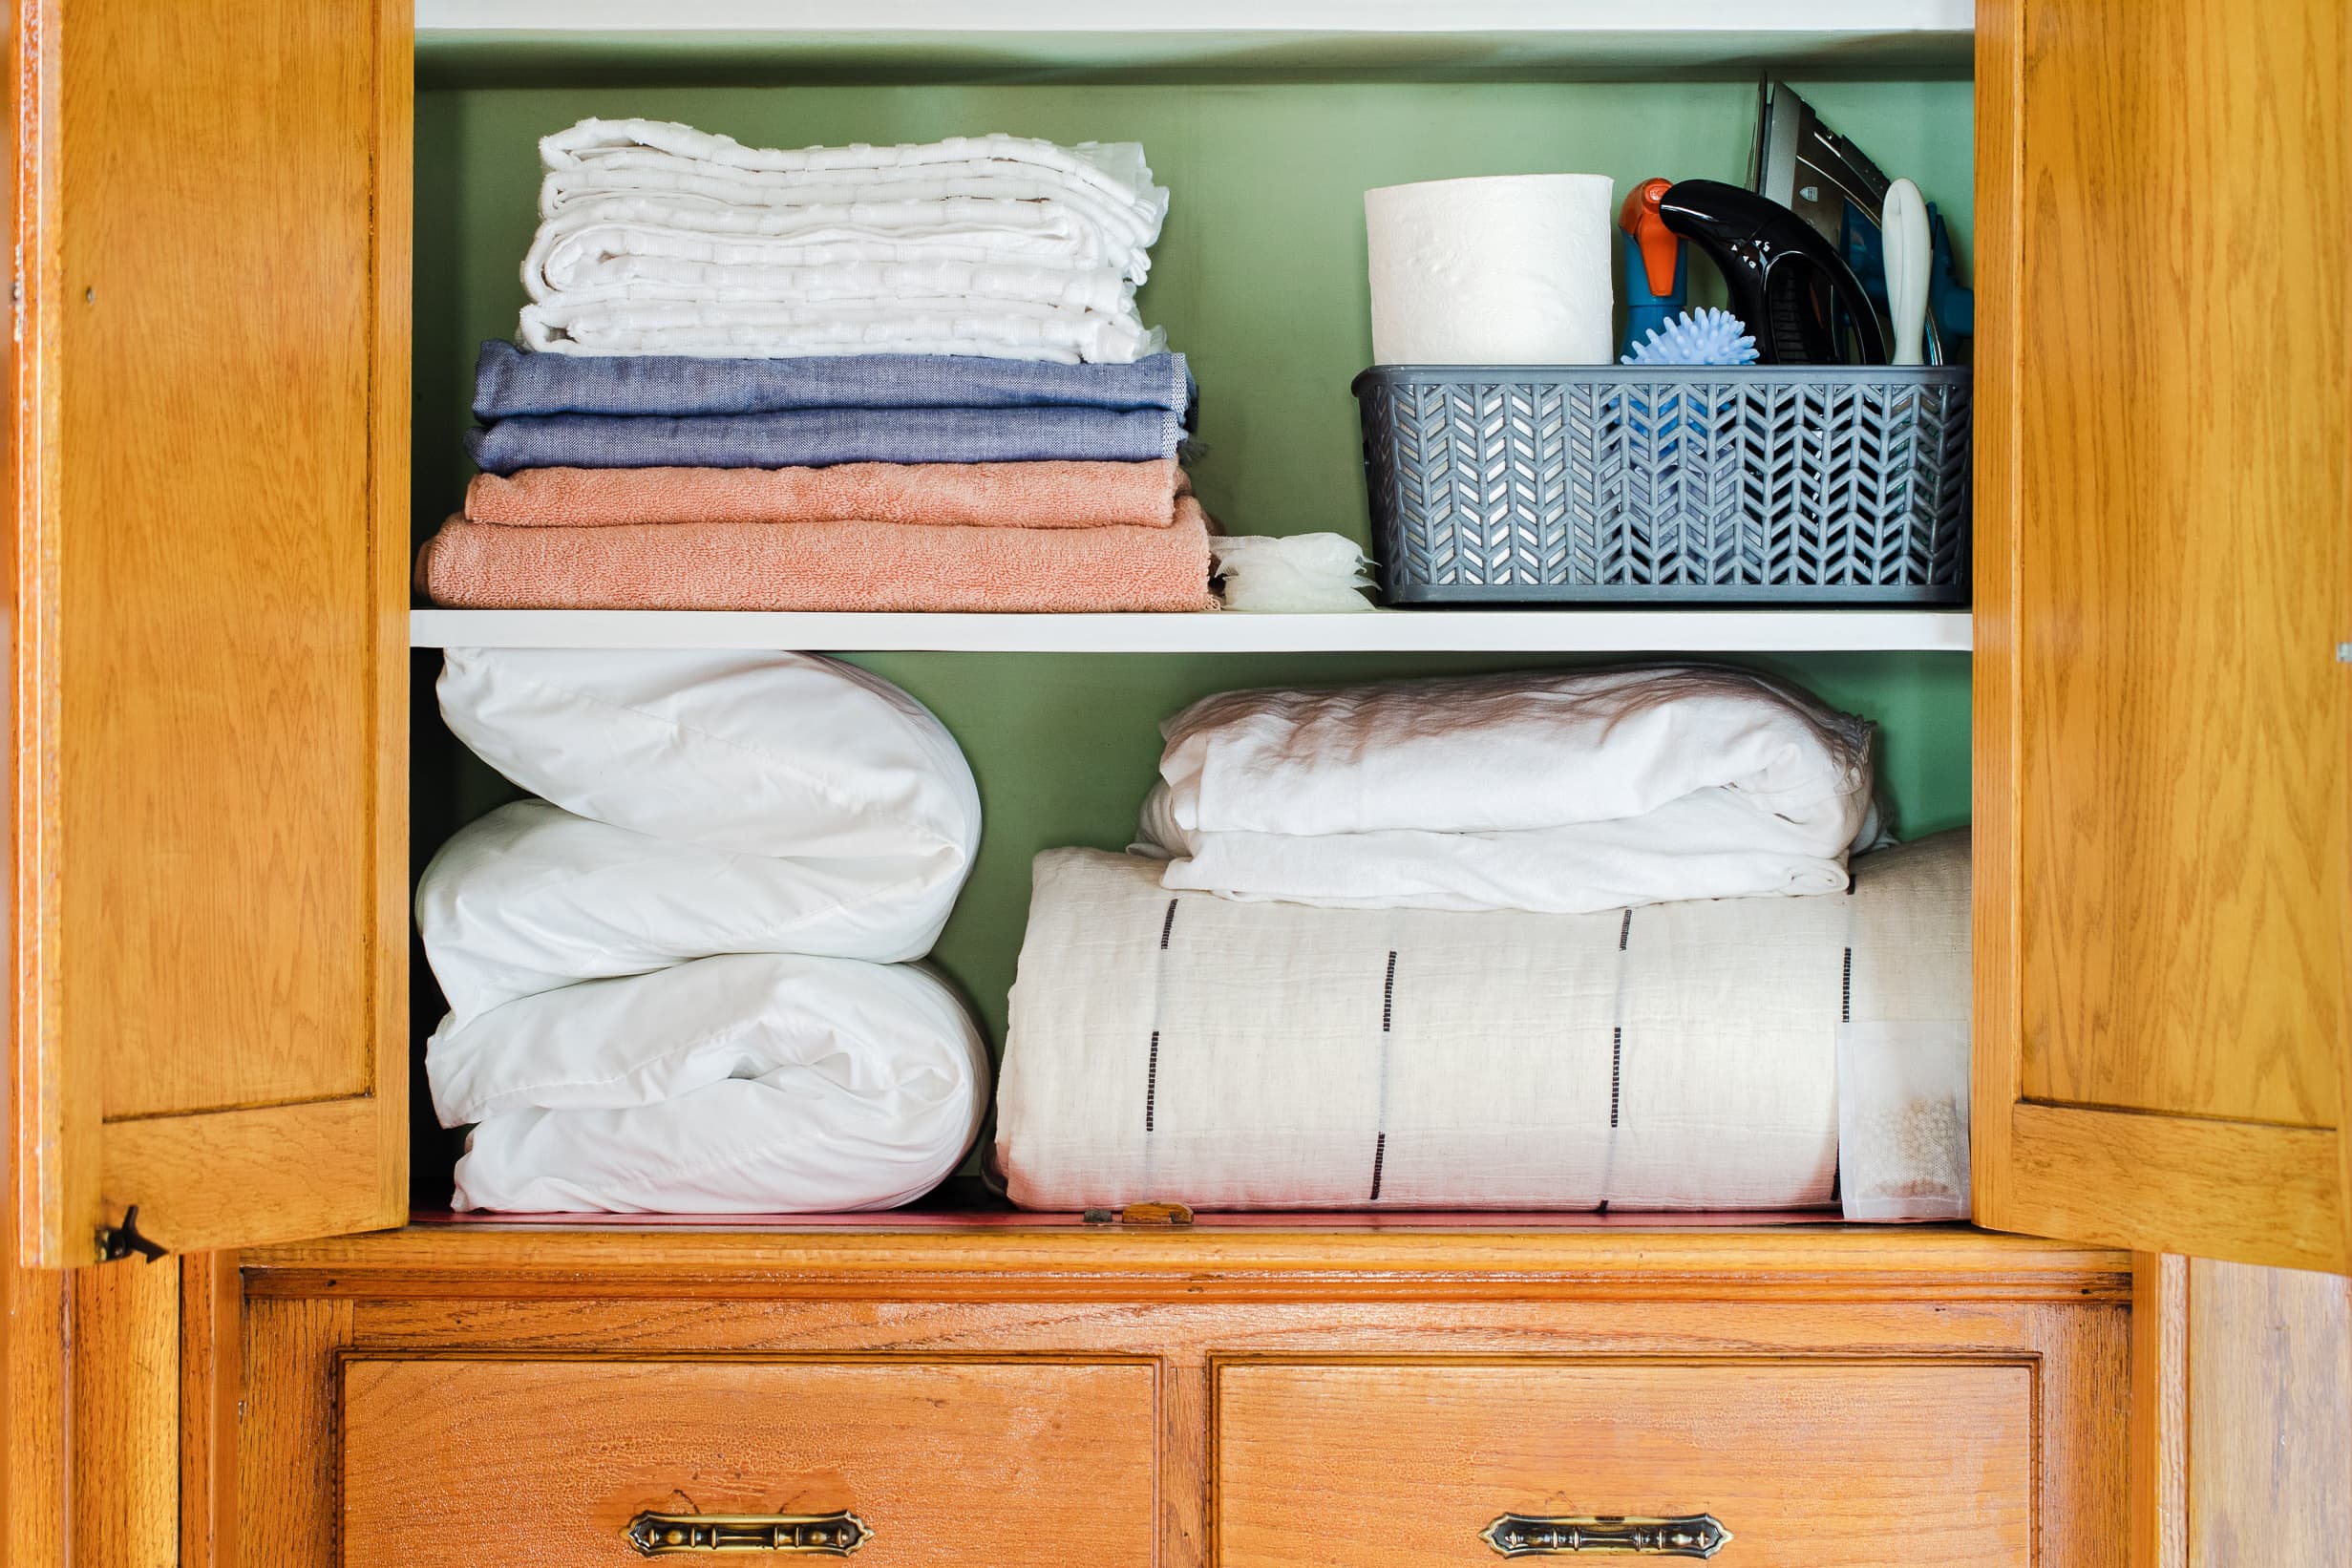 Get It Done: Clean Out the Linen Closet